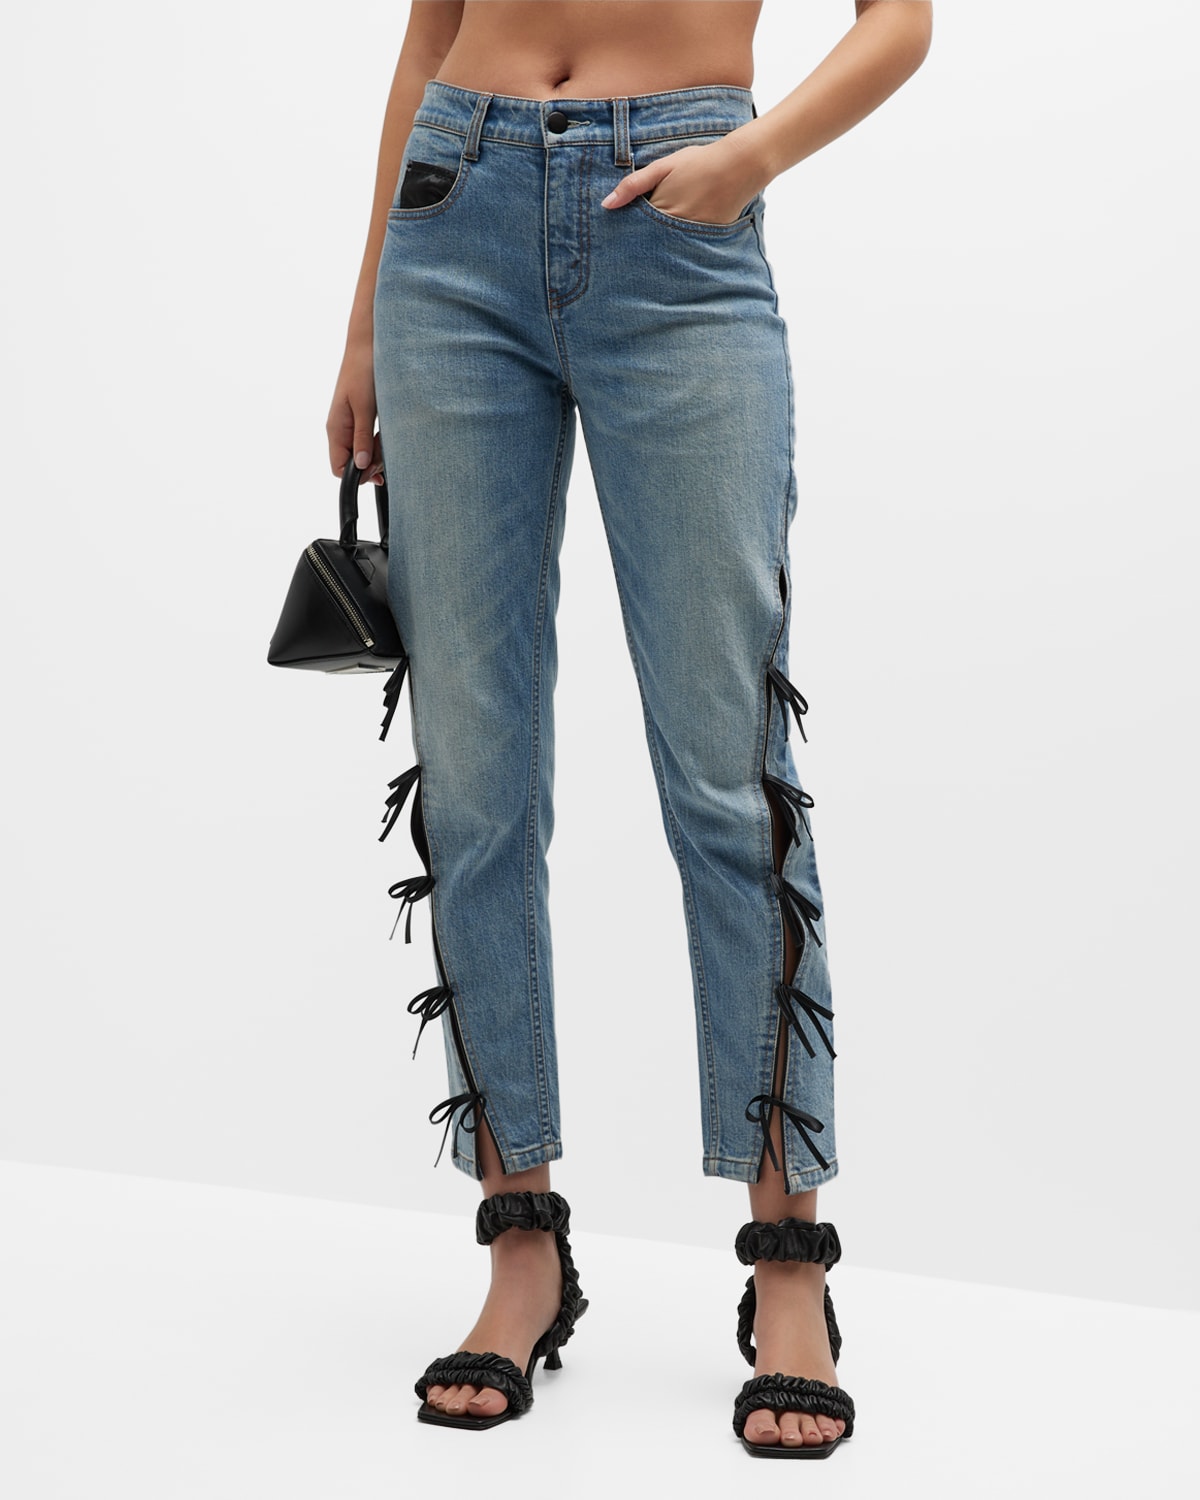 Hellessy Grove Bow Cutout Skinny-Leg Ankle Jeans